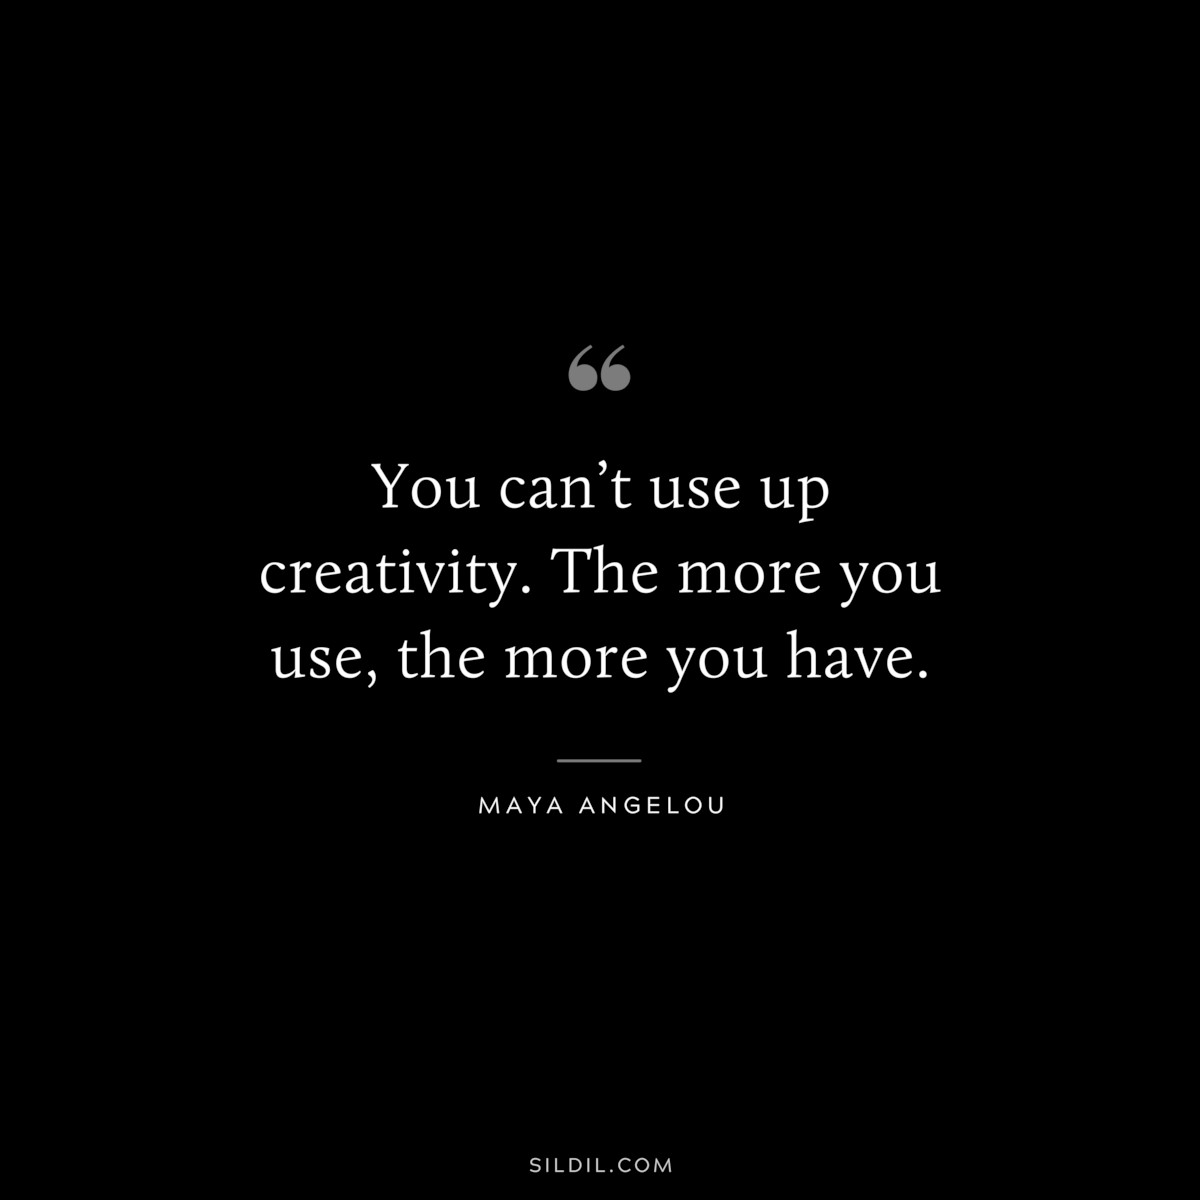 You can’t use up creativity. The more you use, the more you have. ― Maya Angelou